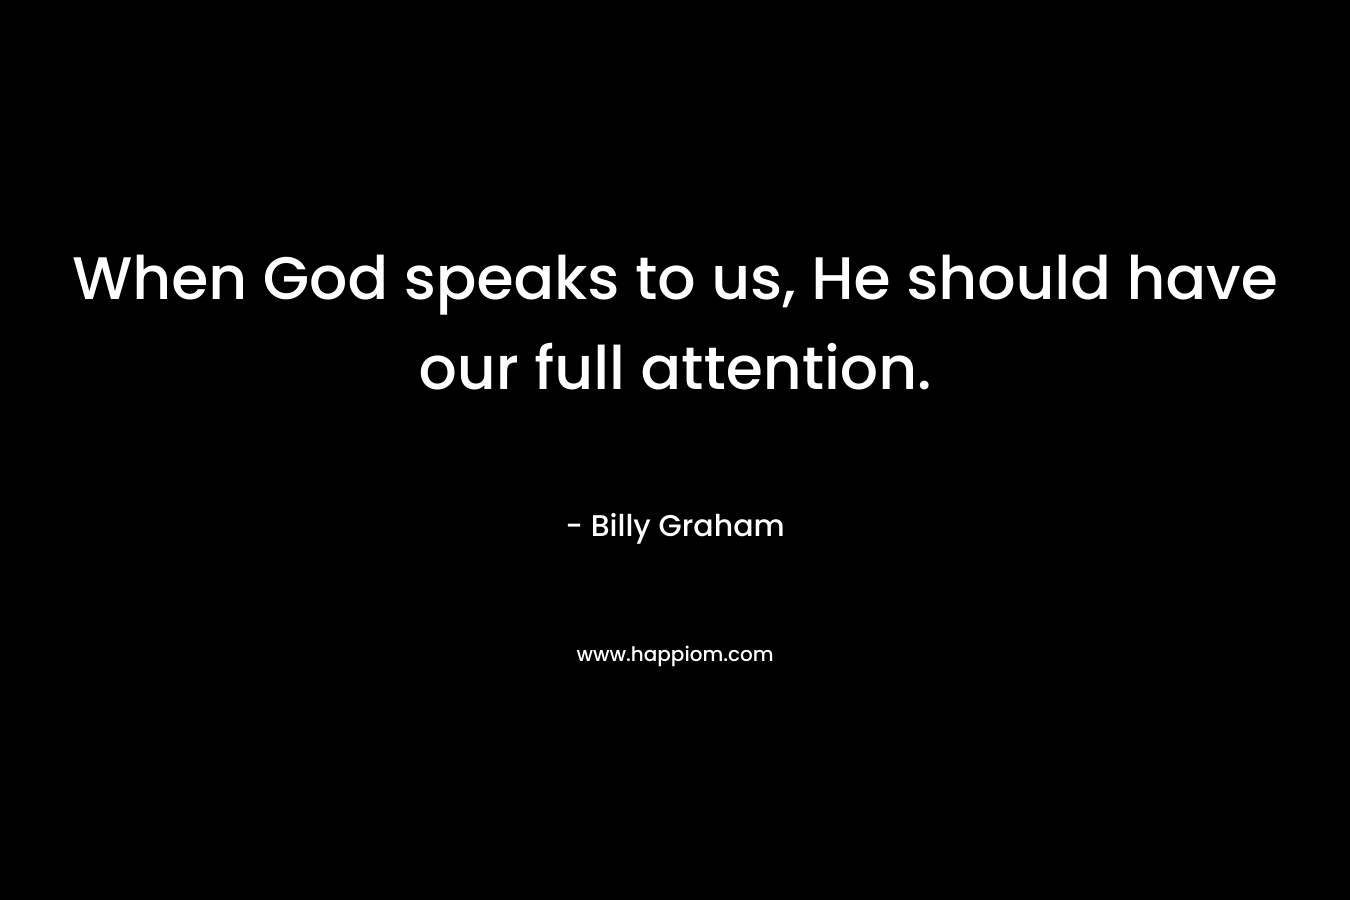 When God speaks to us, He should have our full attention.